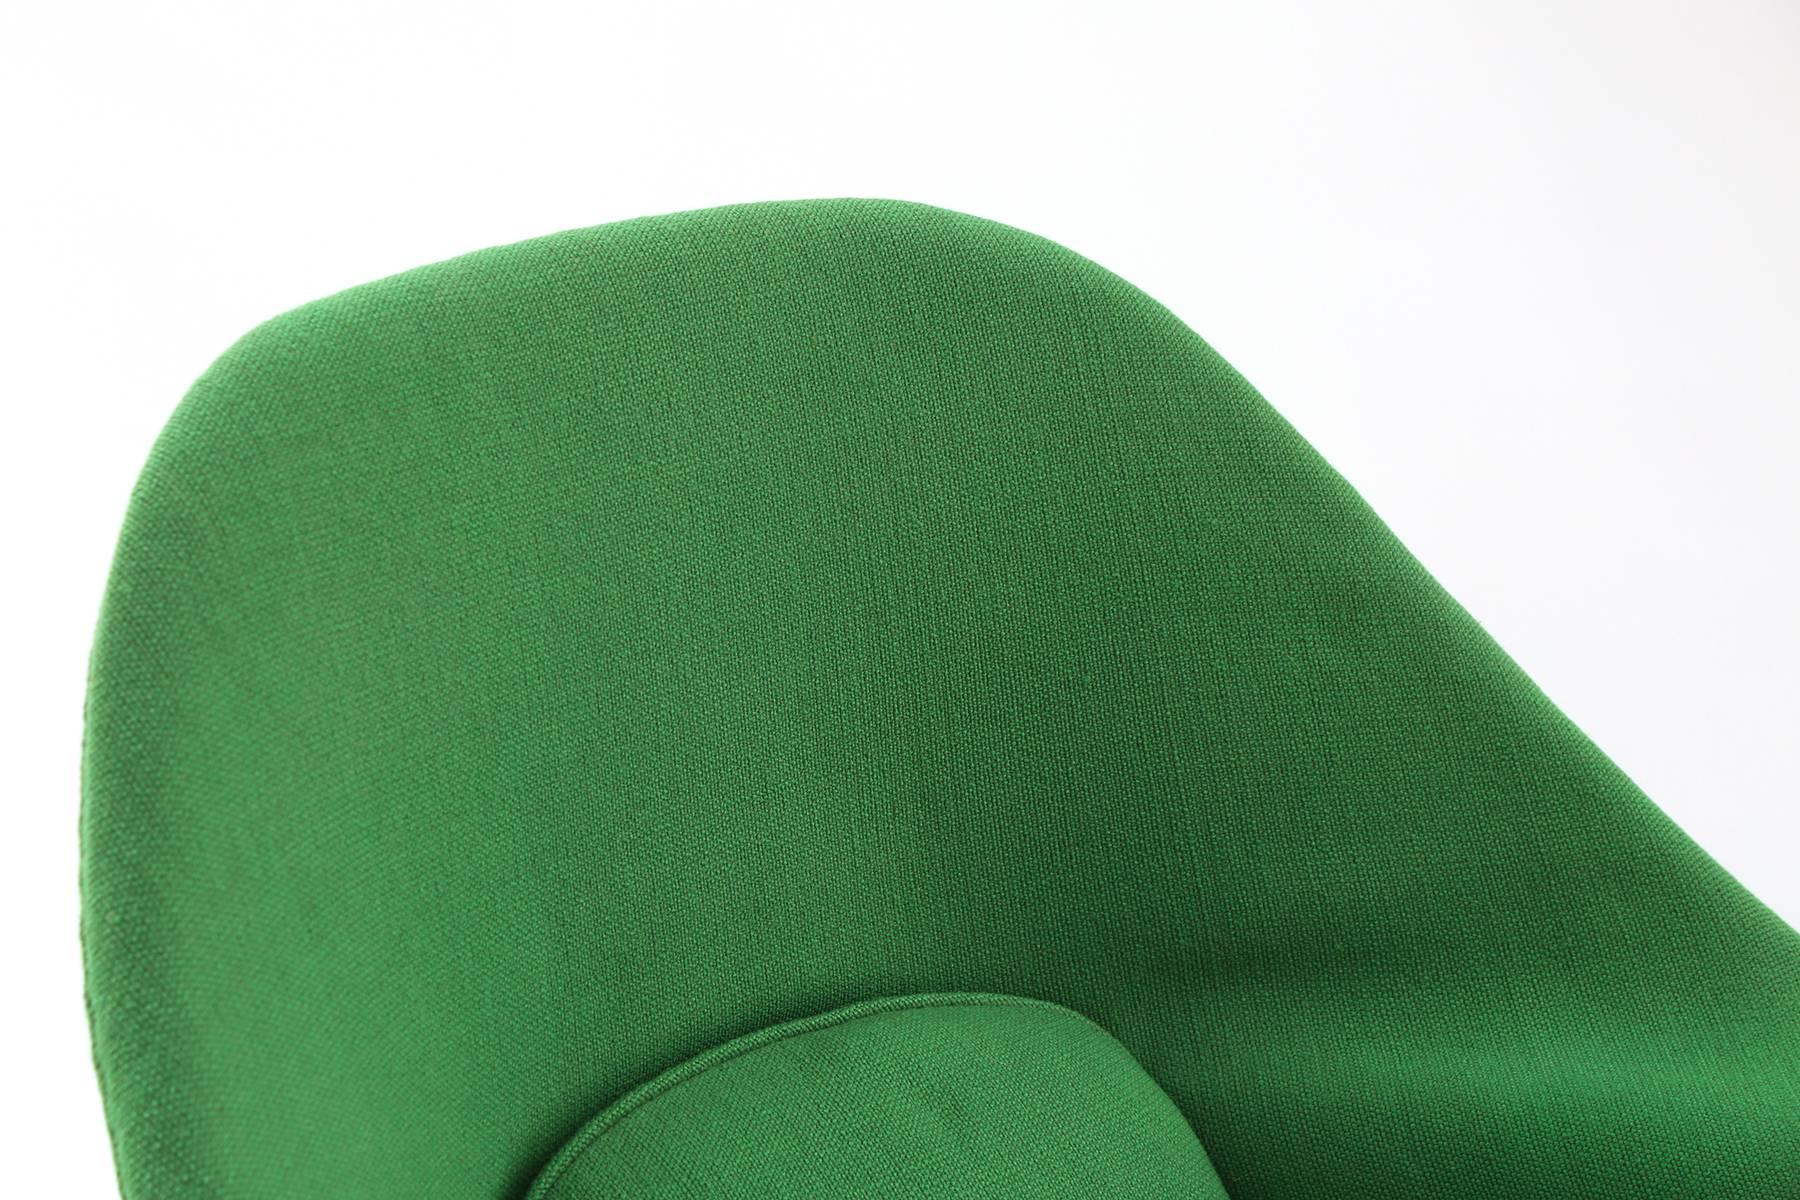 Early production Eero Saarinen Knoll womb chair and ottoman. This example has a black iron frame and is upholstered in a stunning kelly green upholstery. There is wear to the left arm and there is additional fraying on the back. It can be used in